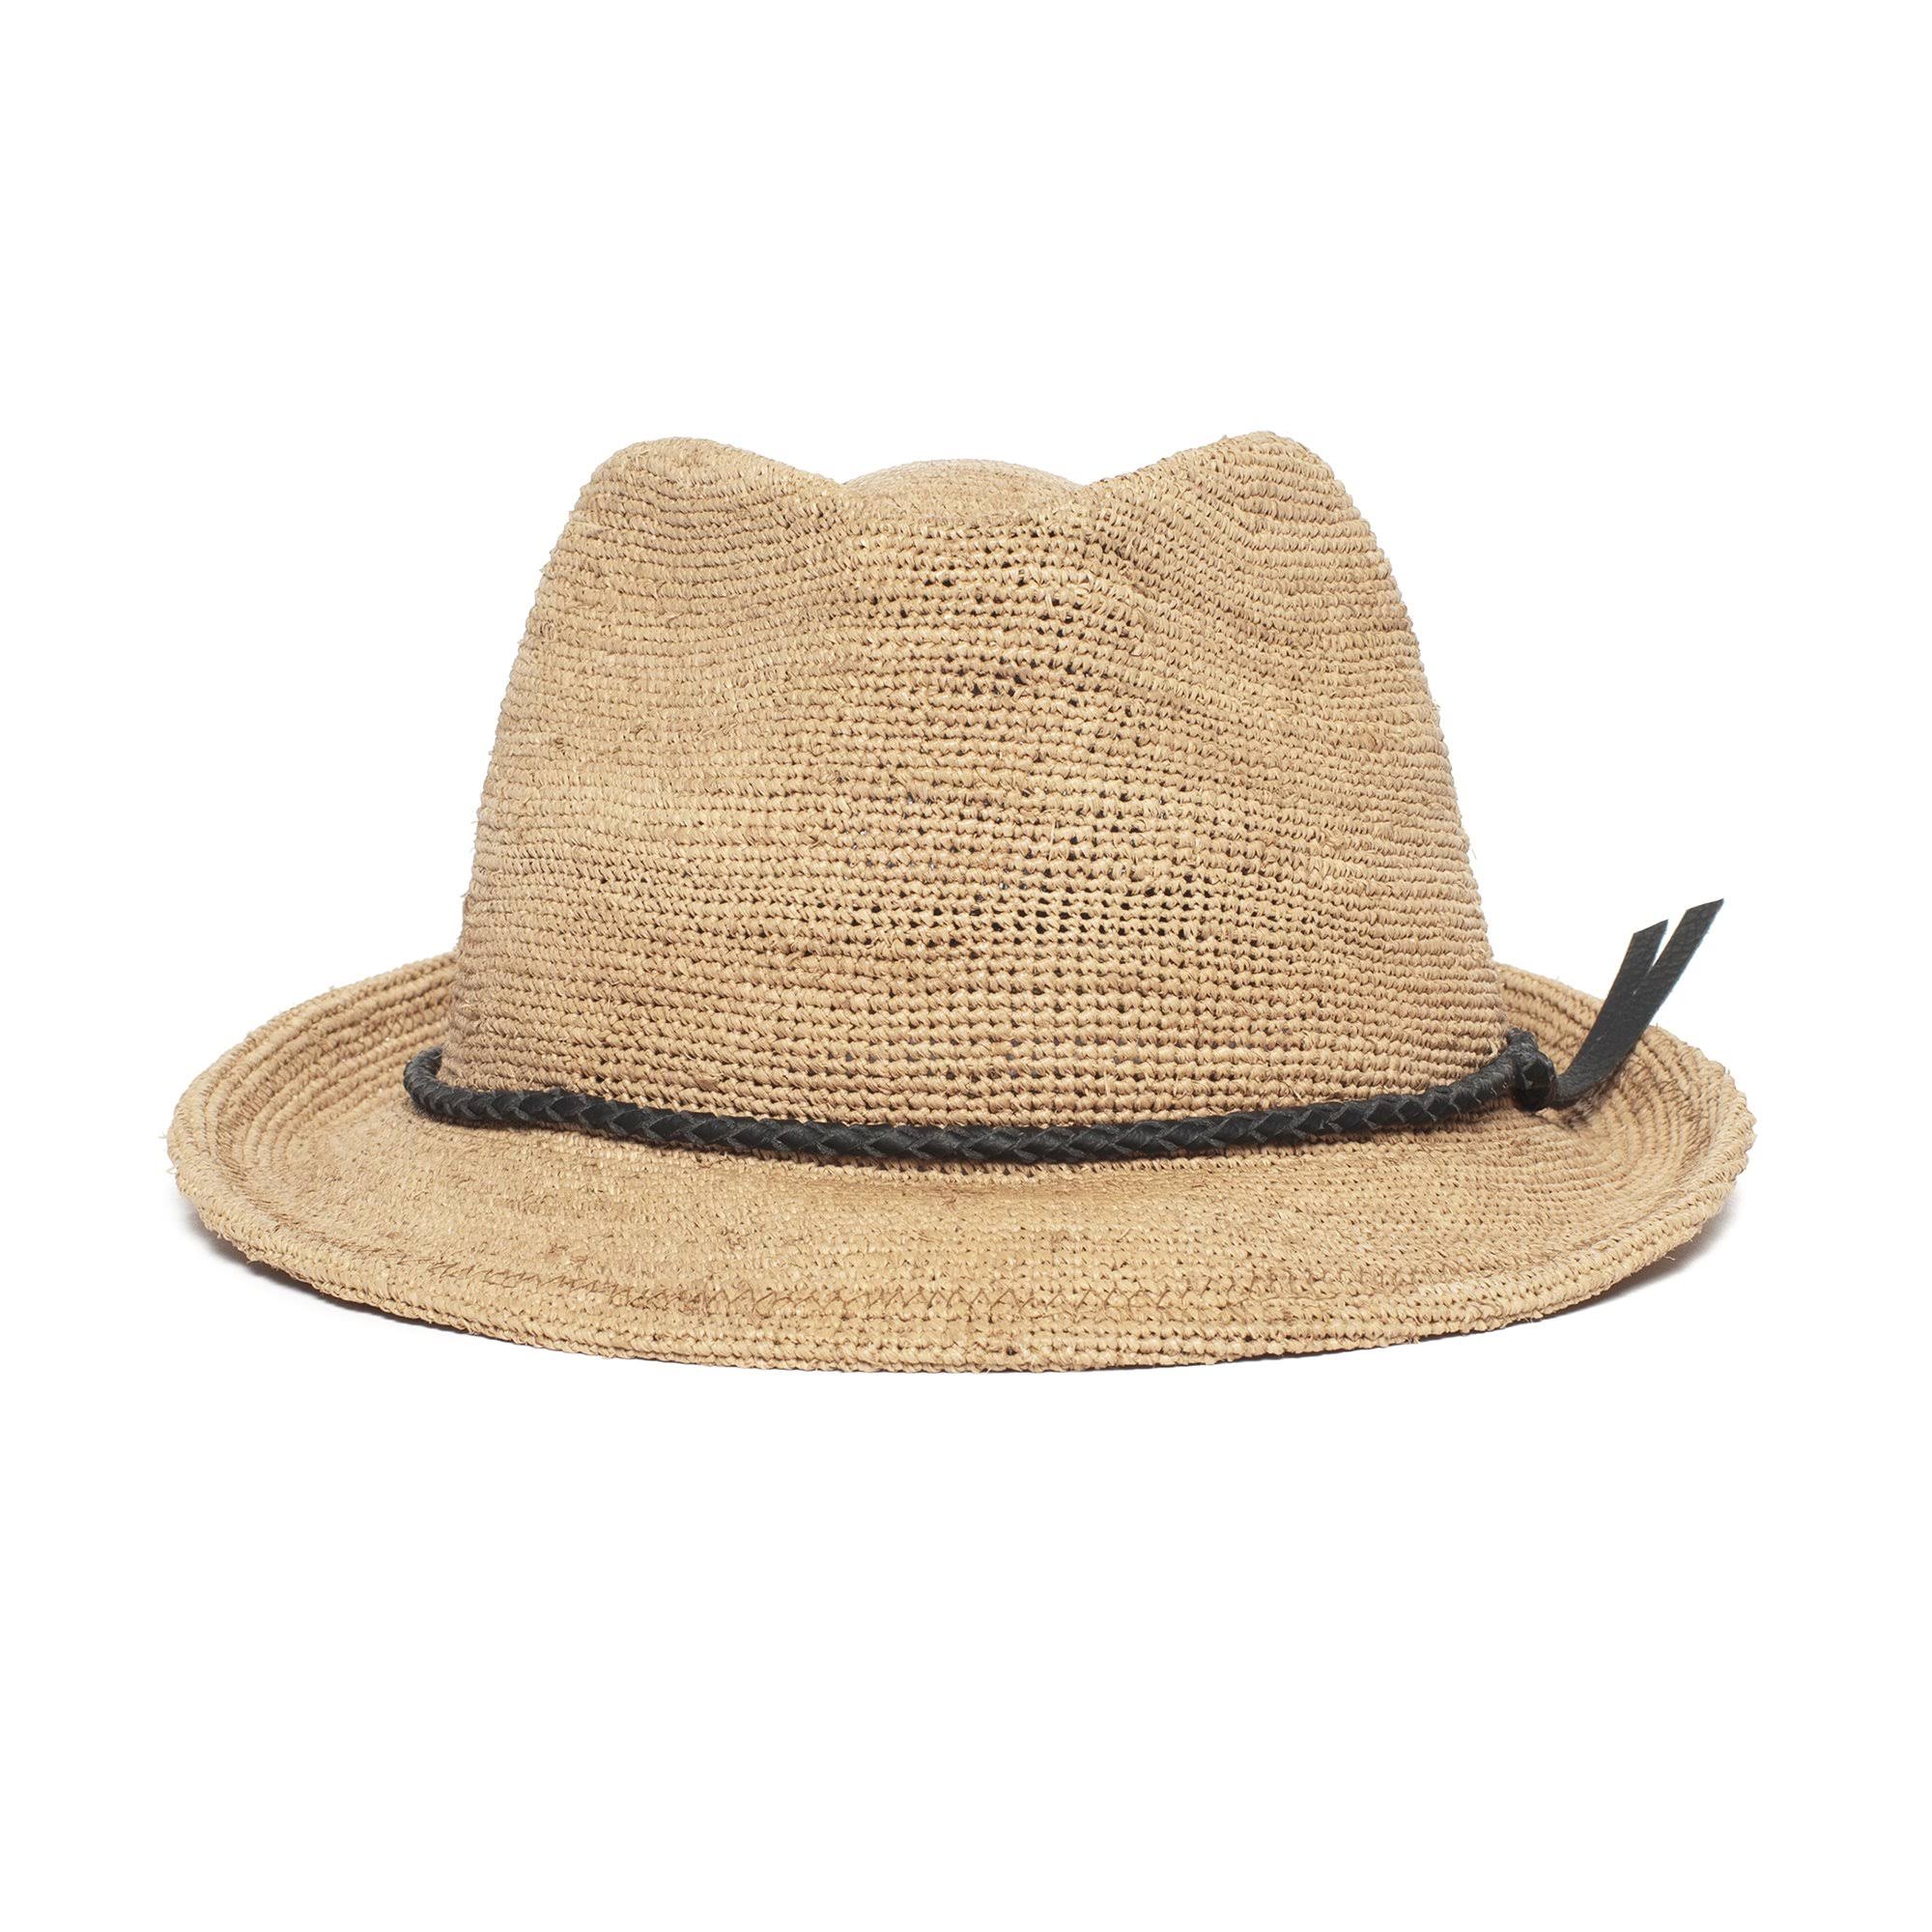 [Brad Pitt same style!]Can be rolls up for packing- Goorin Bros Morning Glory Raffia Straw Trilby Fedora